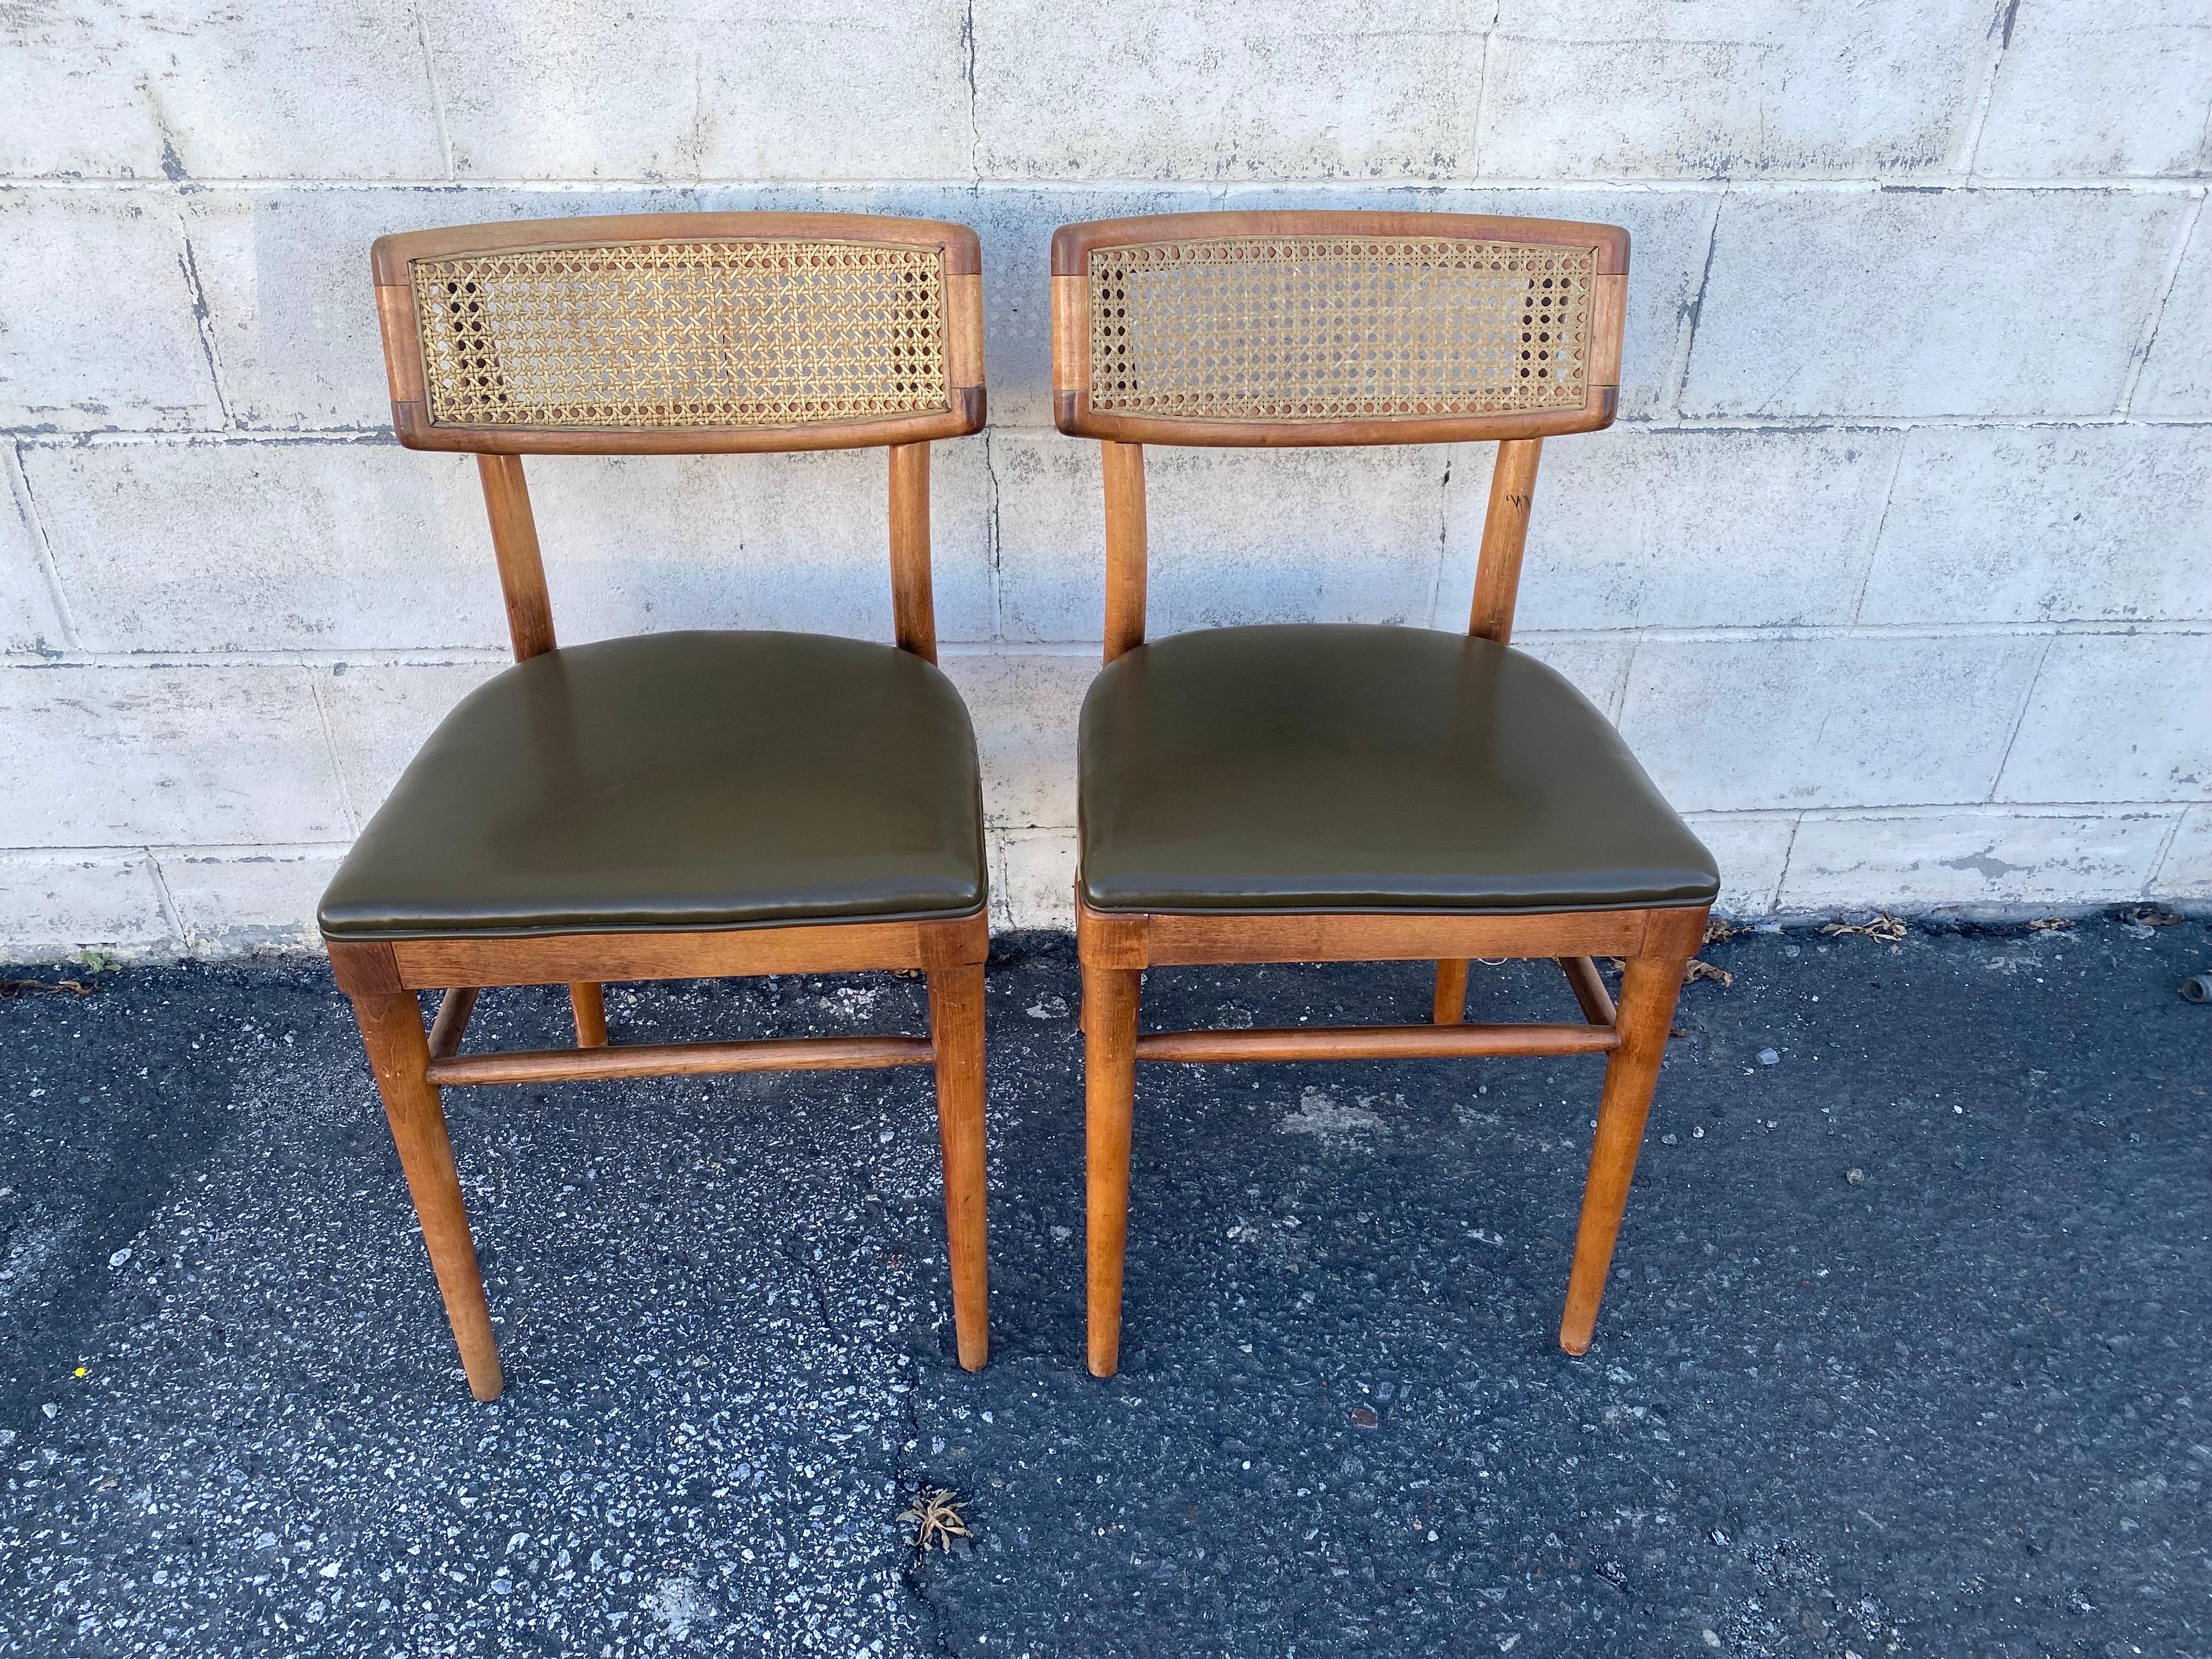 Fantastic pair of bentwood dining chairs with the original dark green vinyl upholstery and cane back made by Thonet in the 1950s. A true testament to it's time, both in craftsmanship and design. 

Both chairs are in excellent structural condition